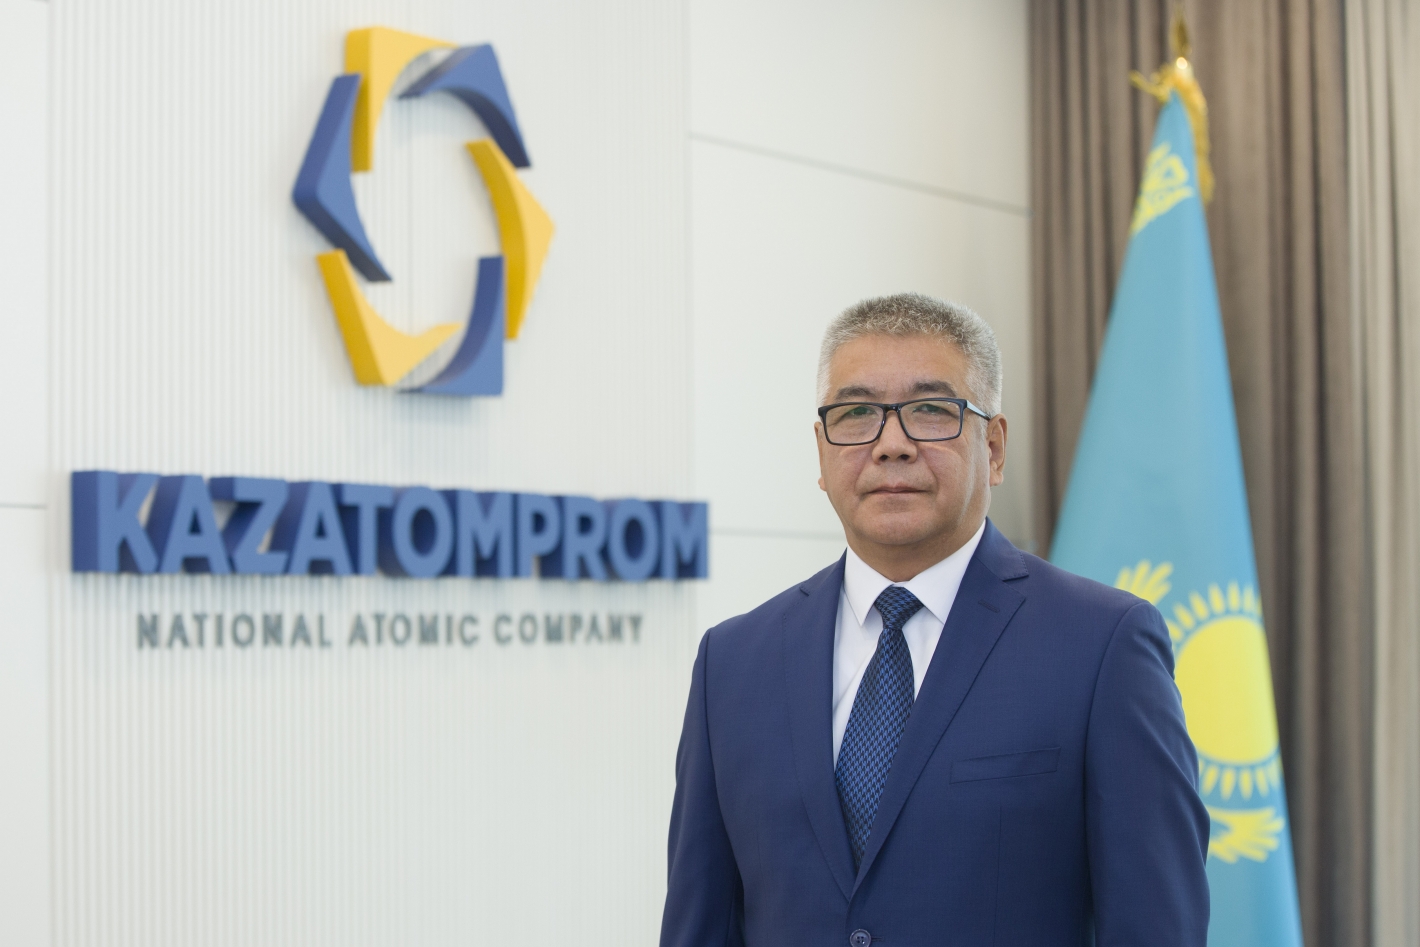 Kazatomprom announces appointment of CEO and management changes